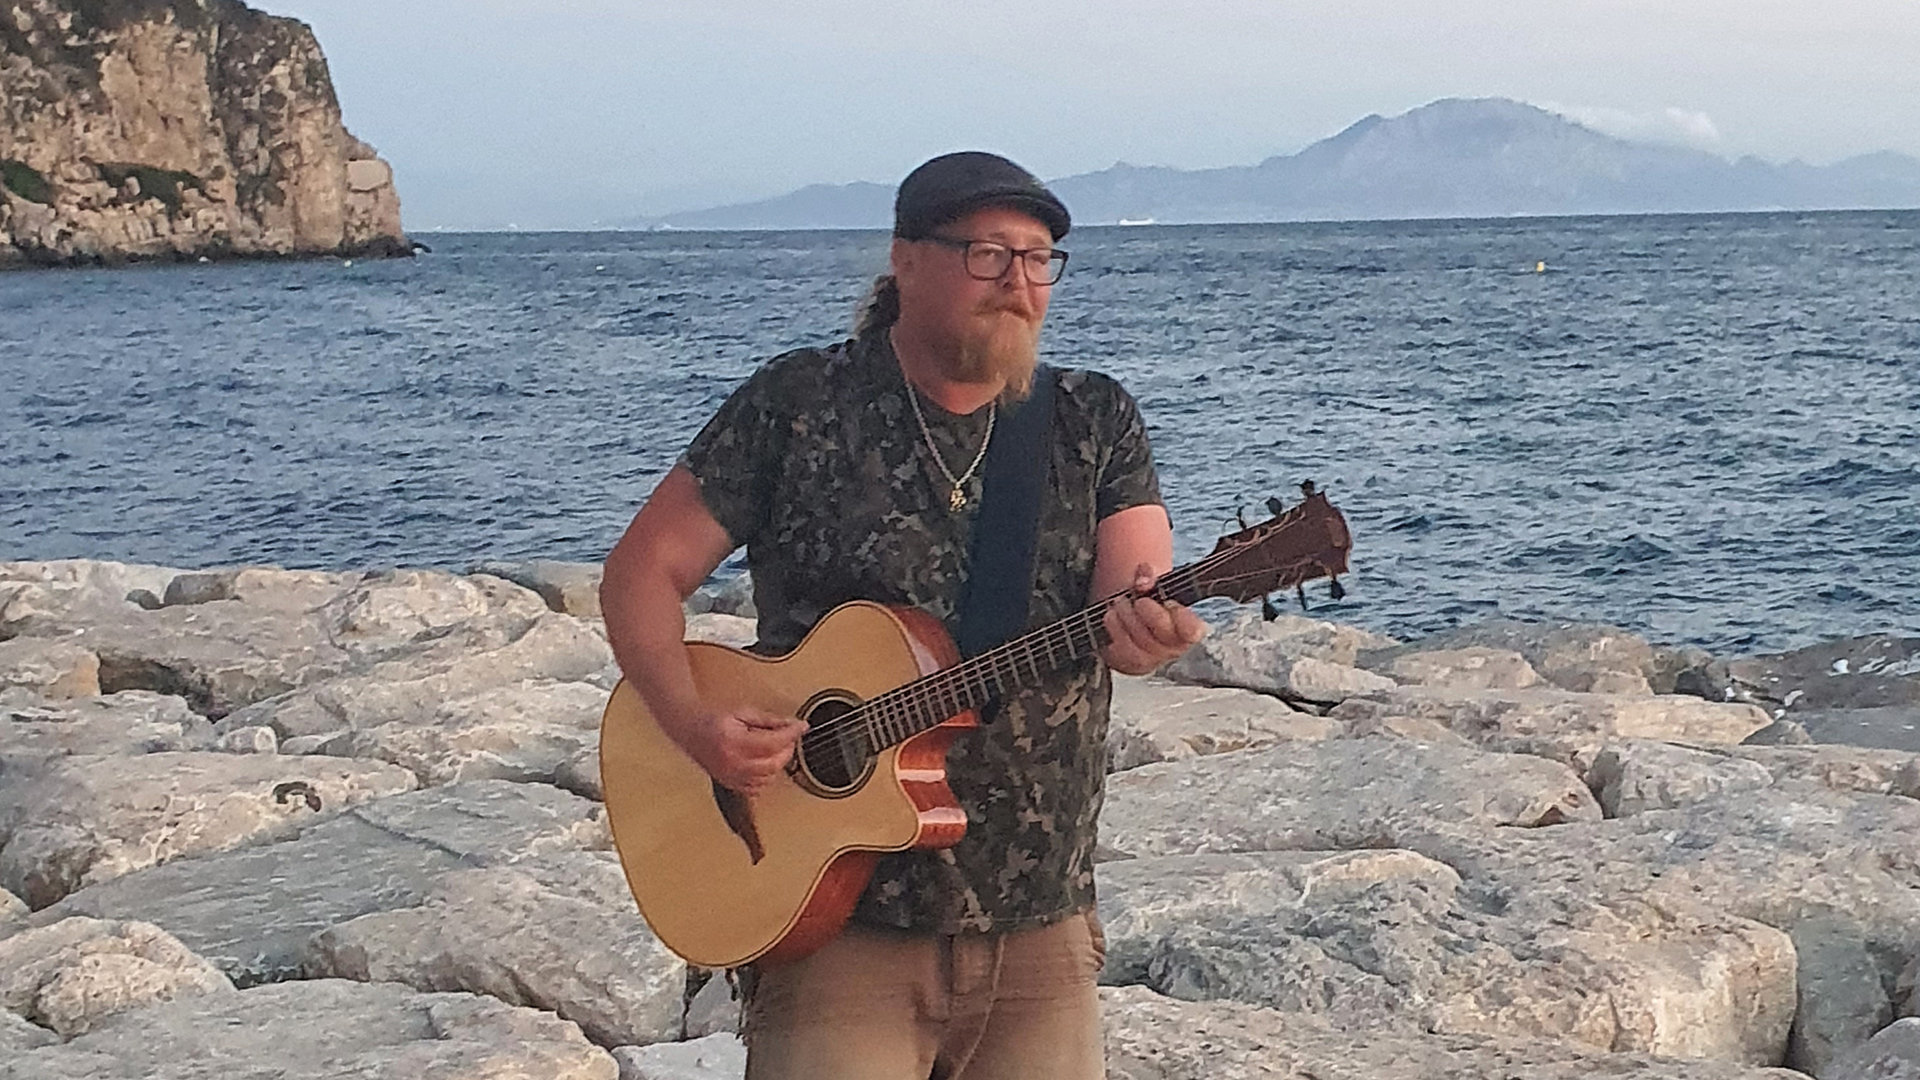 Poorest Tourist, aka Stephen Woodhouse, standing on a beach playing a guitar